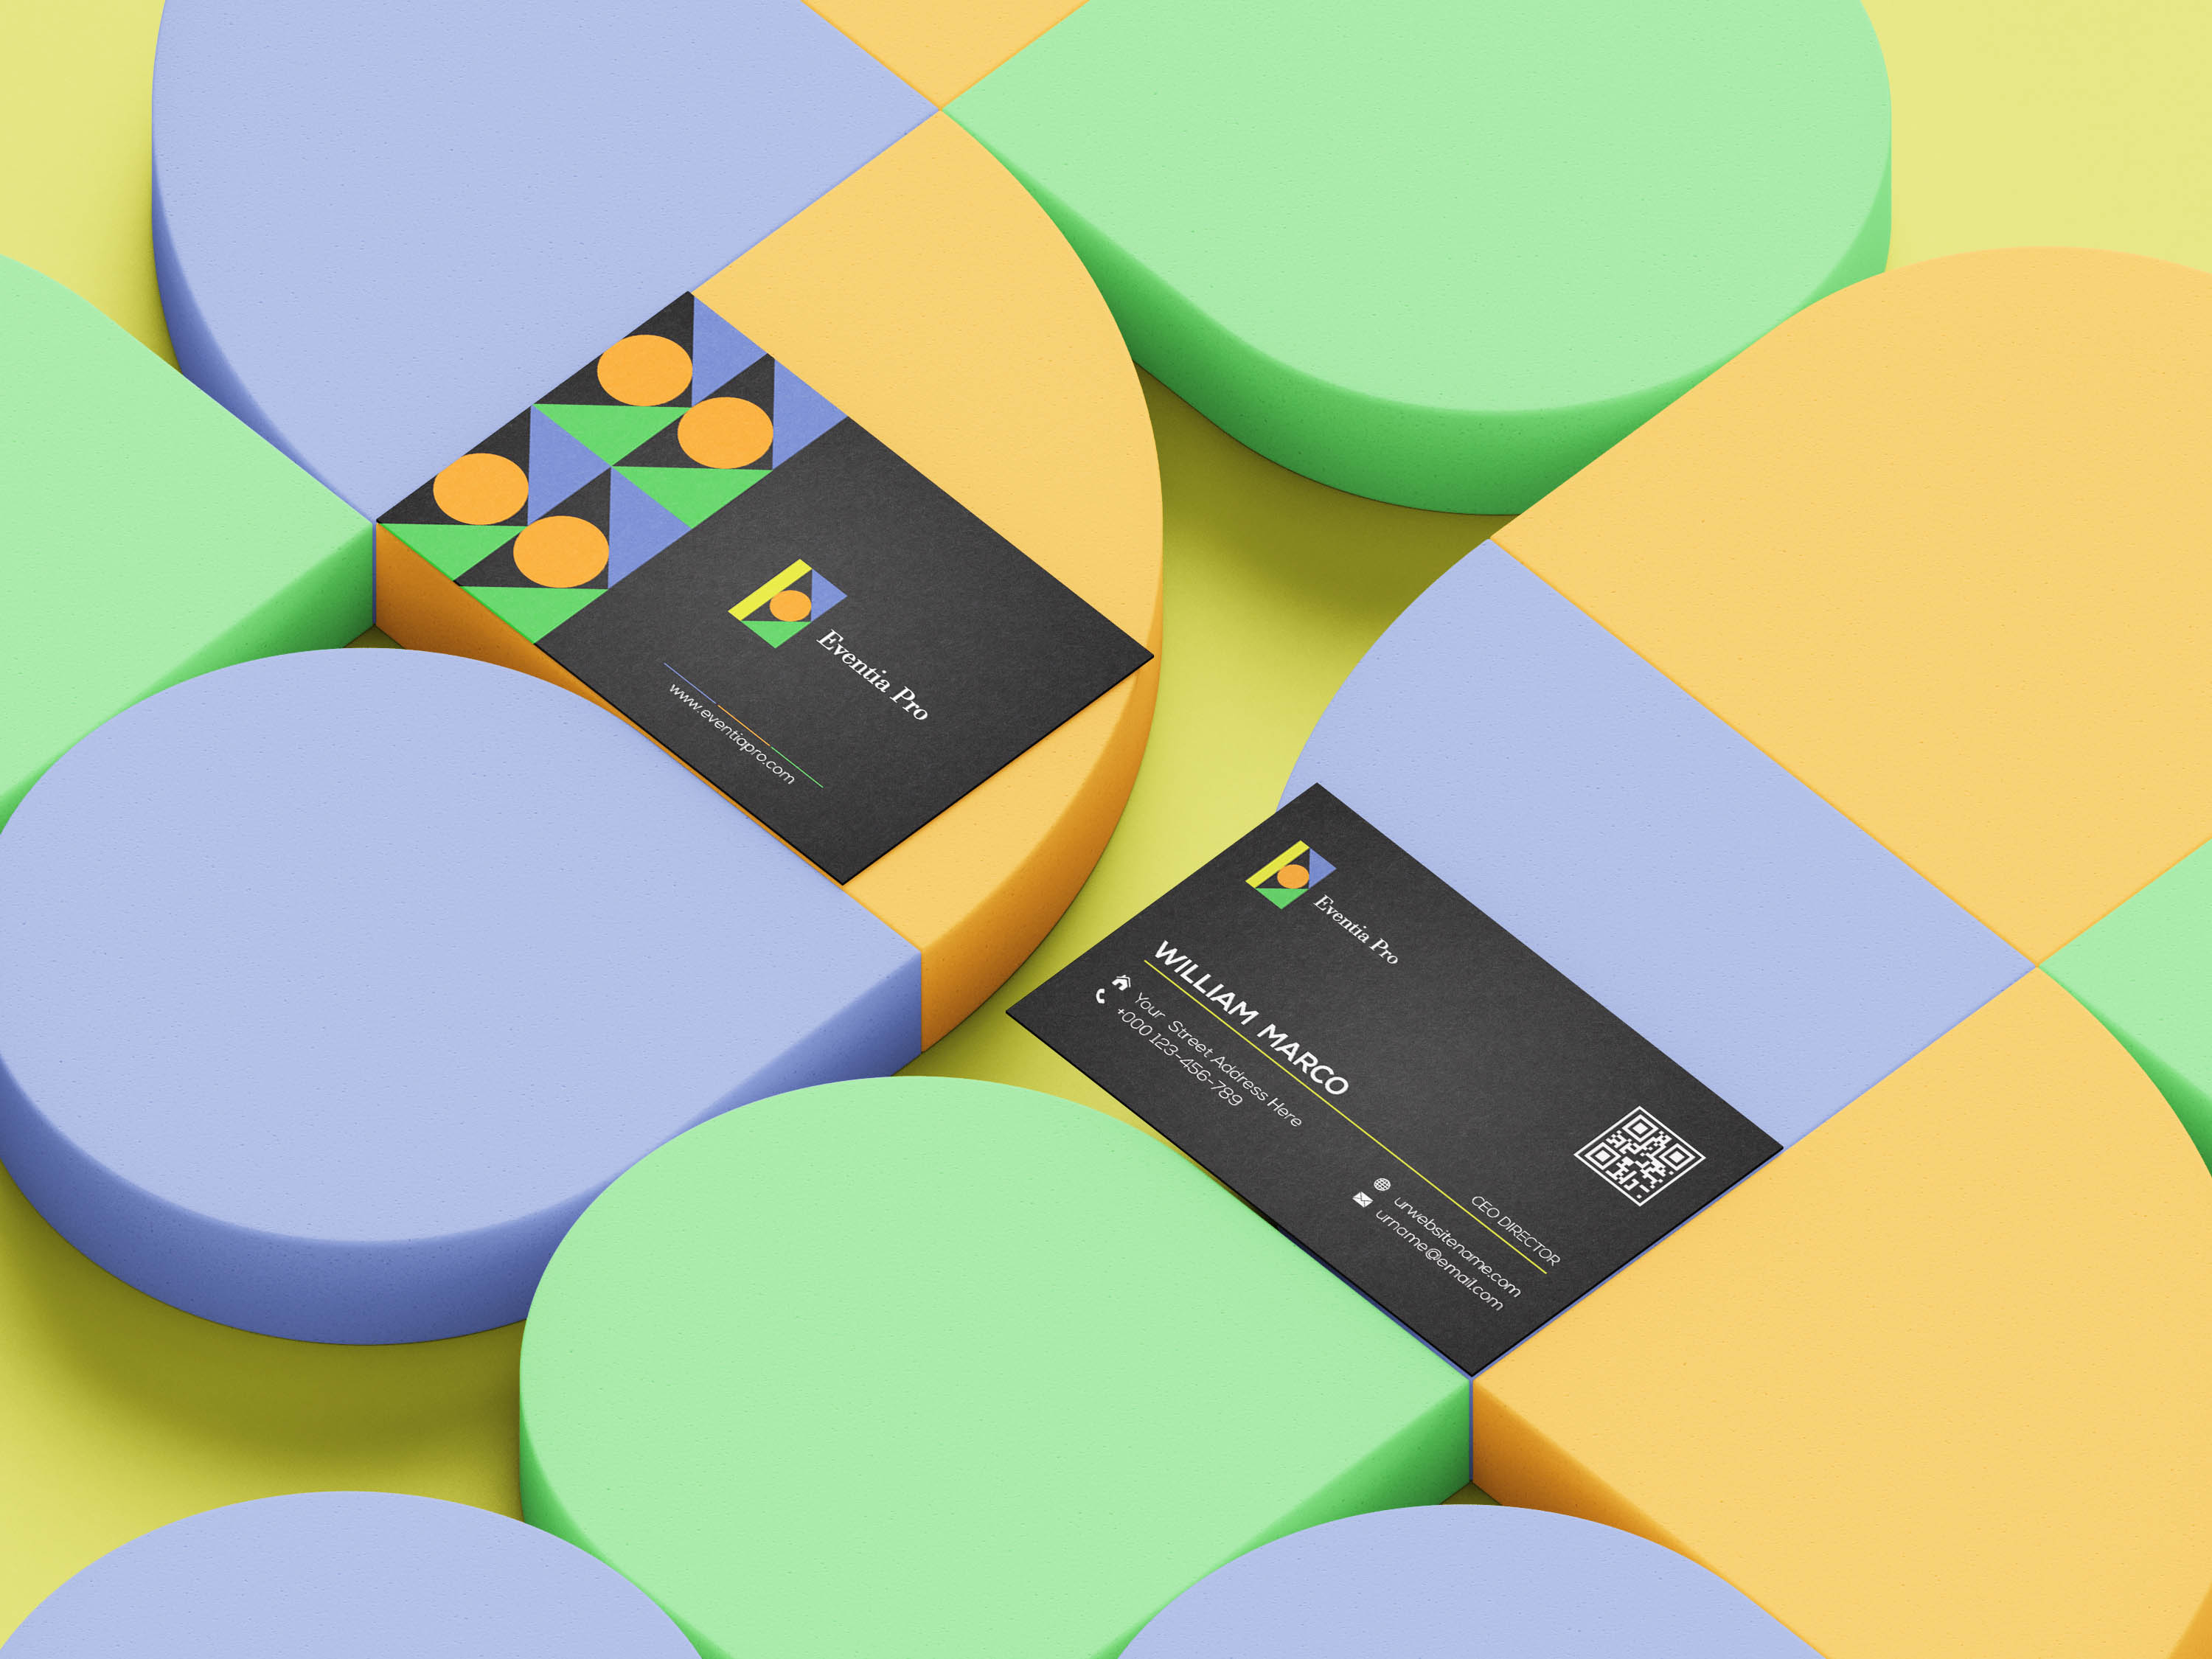 Close up of a business card on a colorful surface.